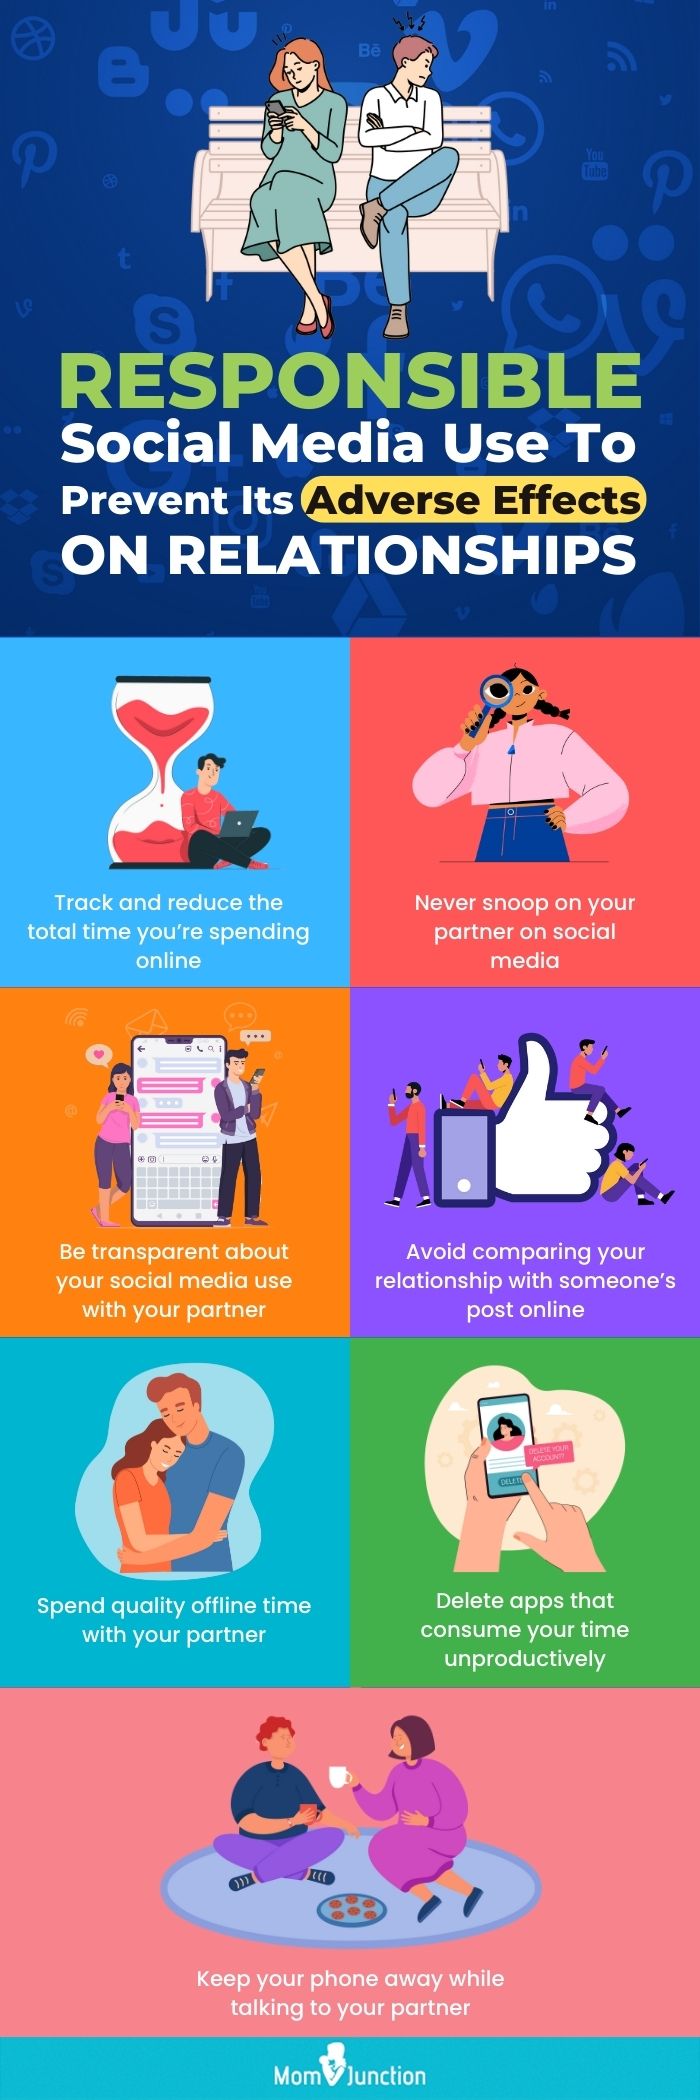 responsible social media use to prevent its adverse effects on relationships [infographic]